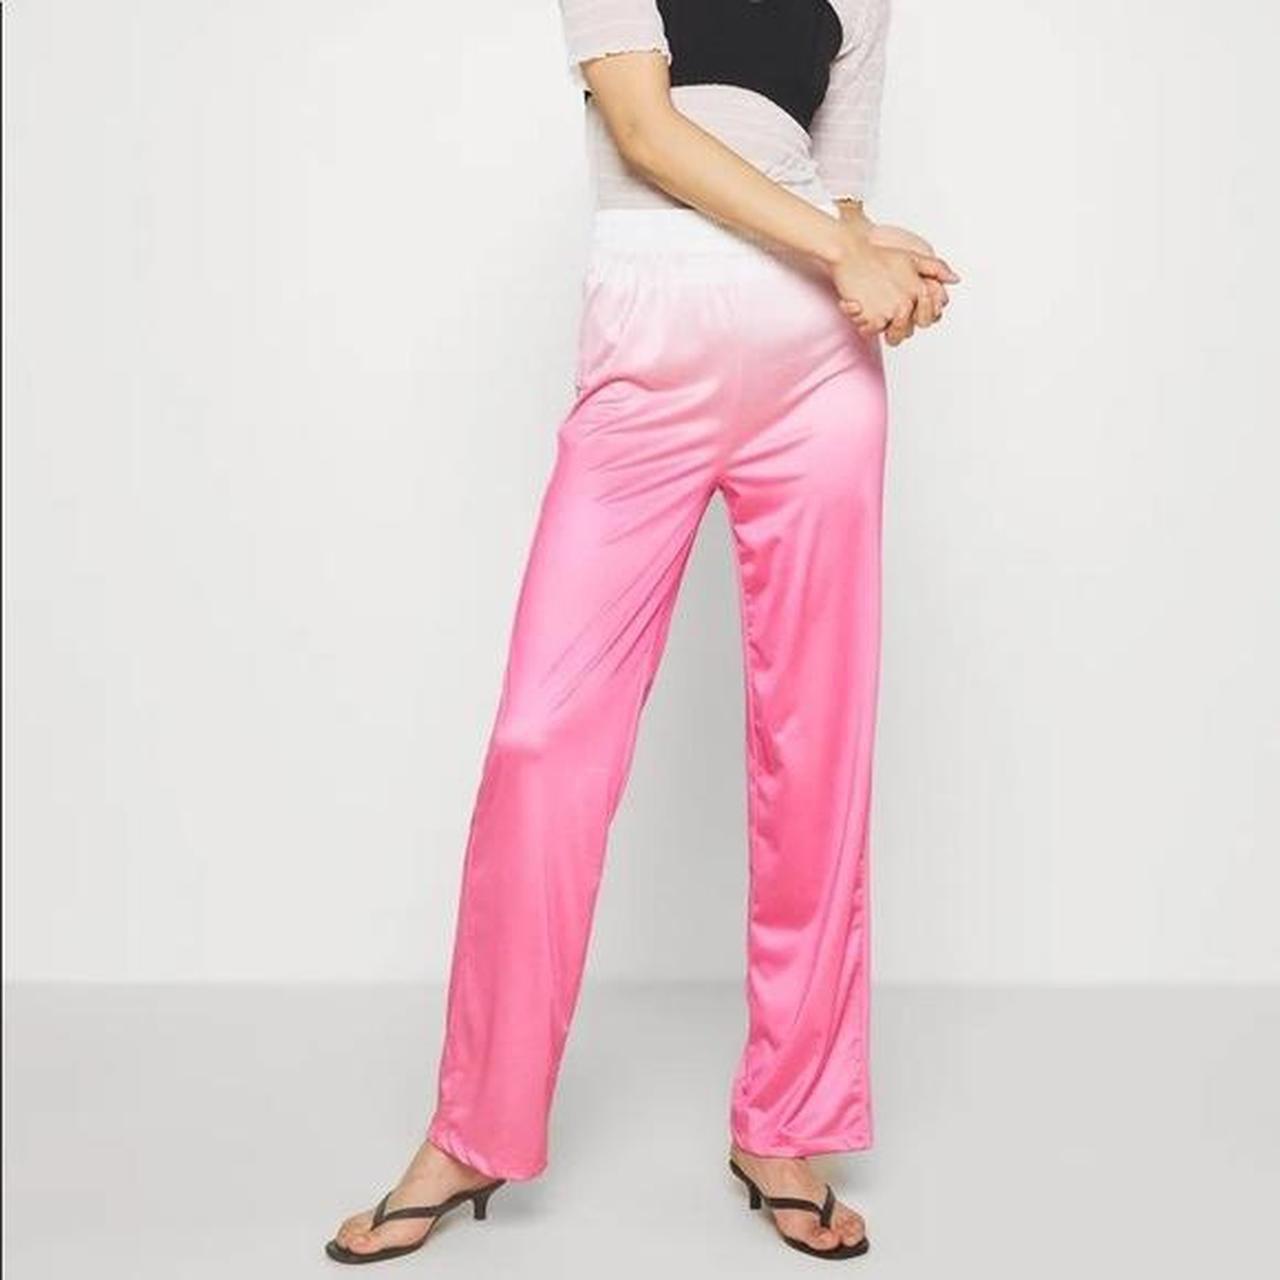 Hosbjerg Women's White and Pink Trousers (3)